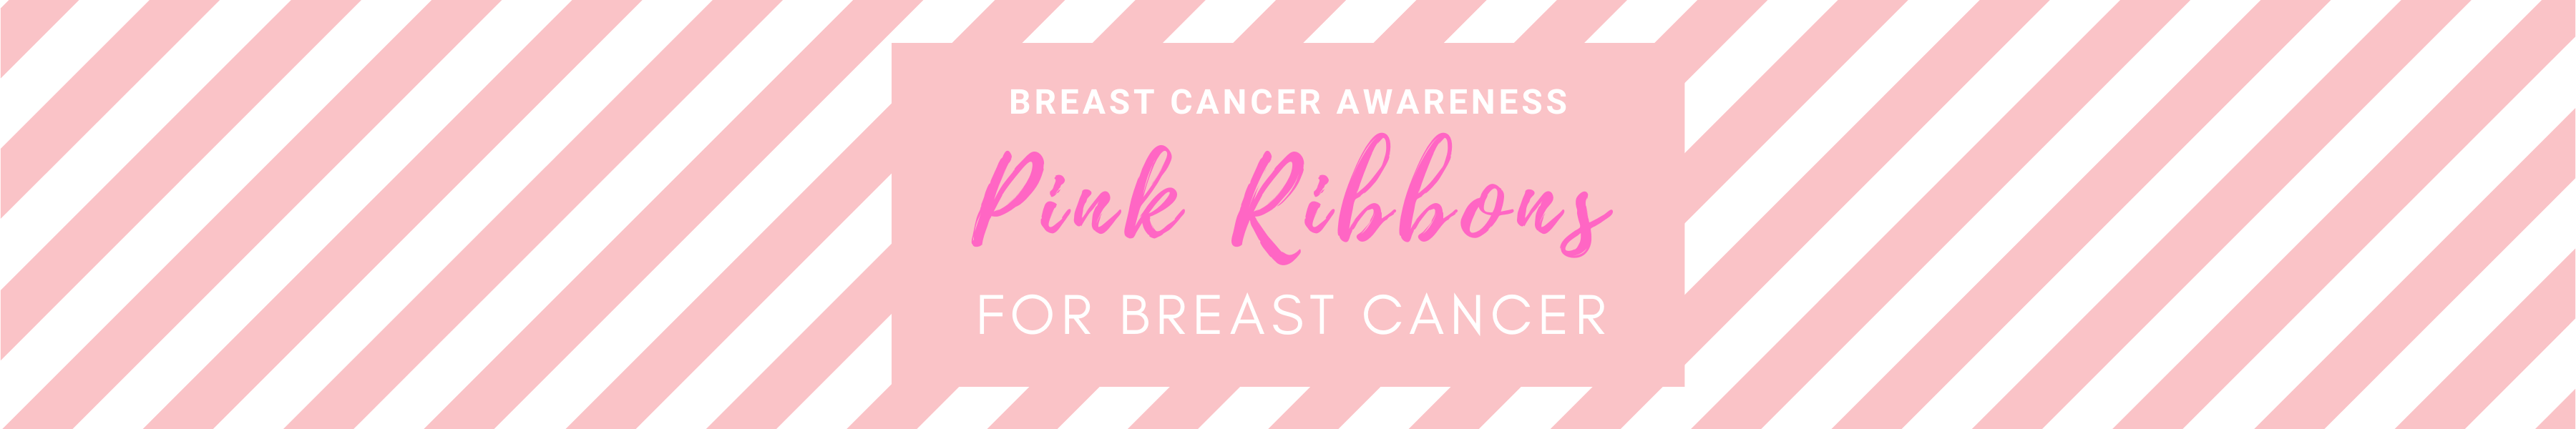 Breast Cancer Awareness & The Origins of the Pink Ribbon